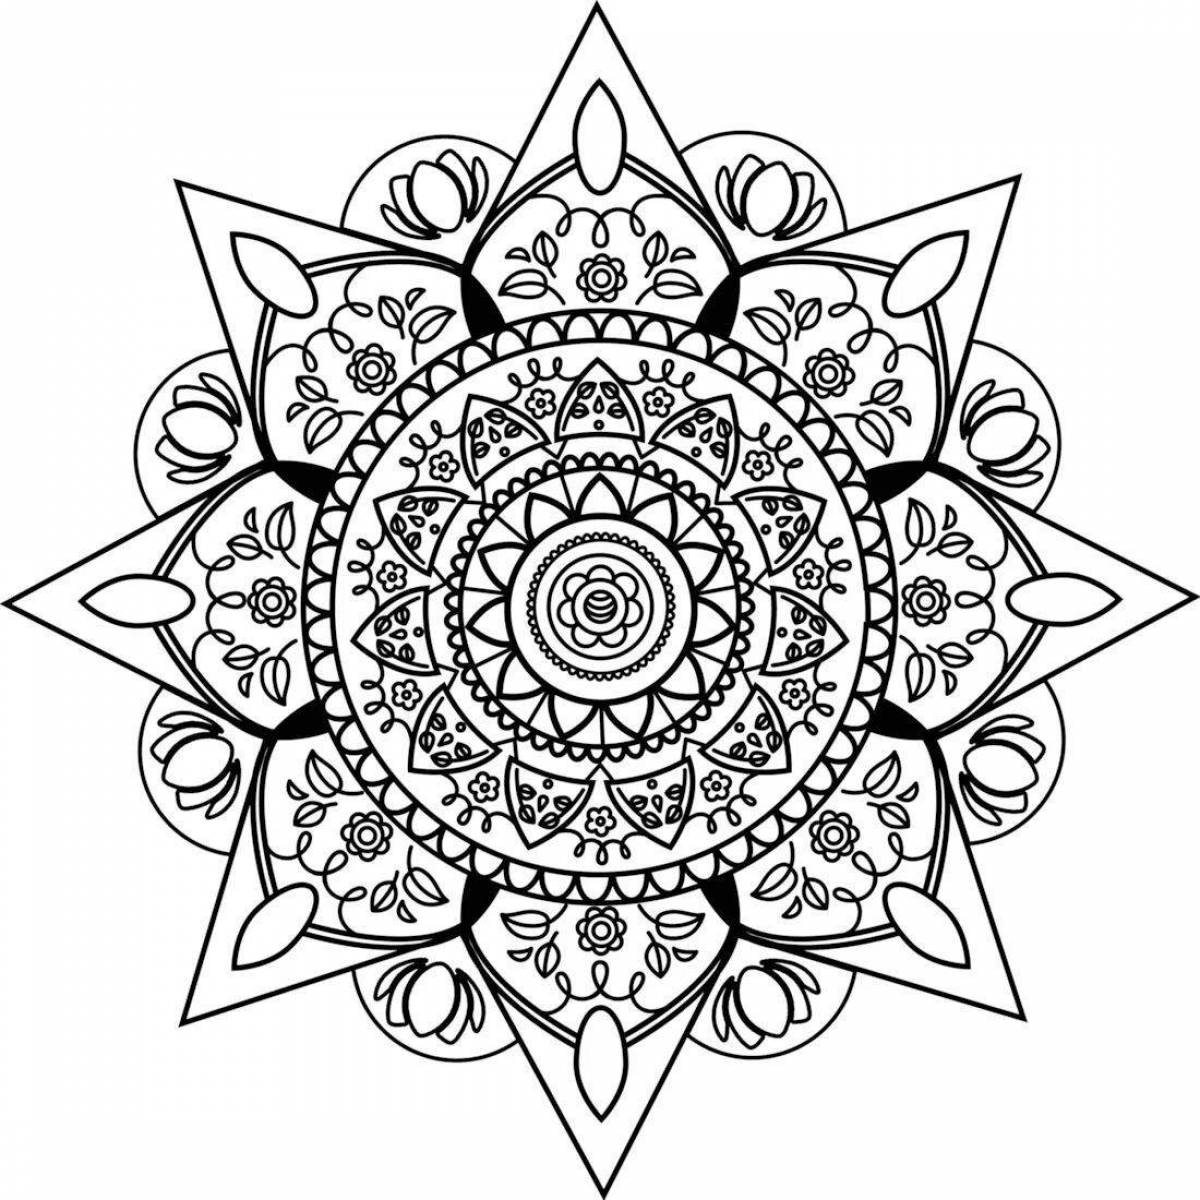 Blooming coloring mandala of wealth and prosperity